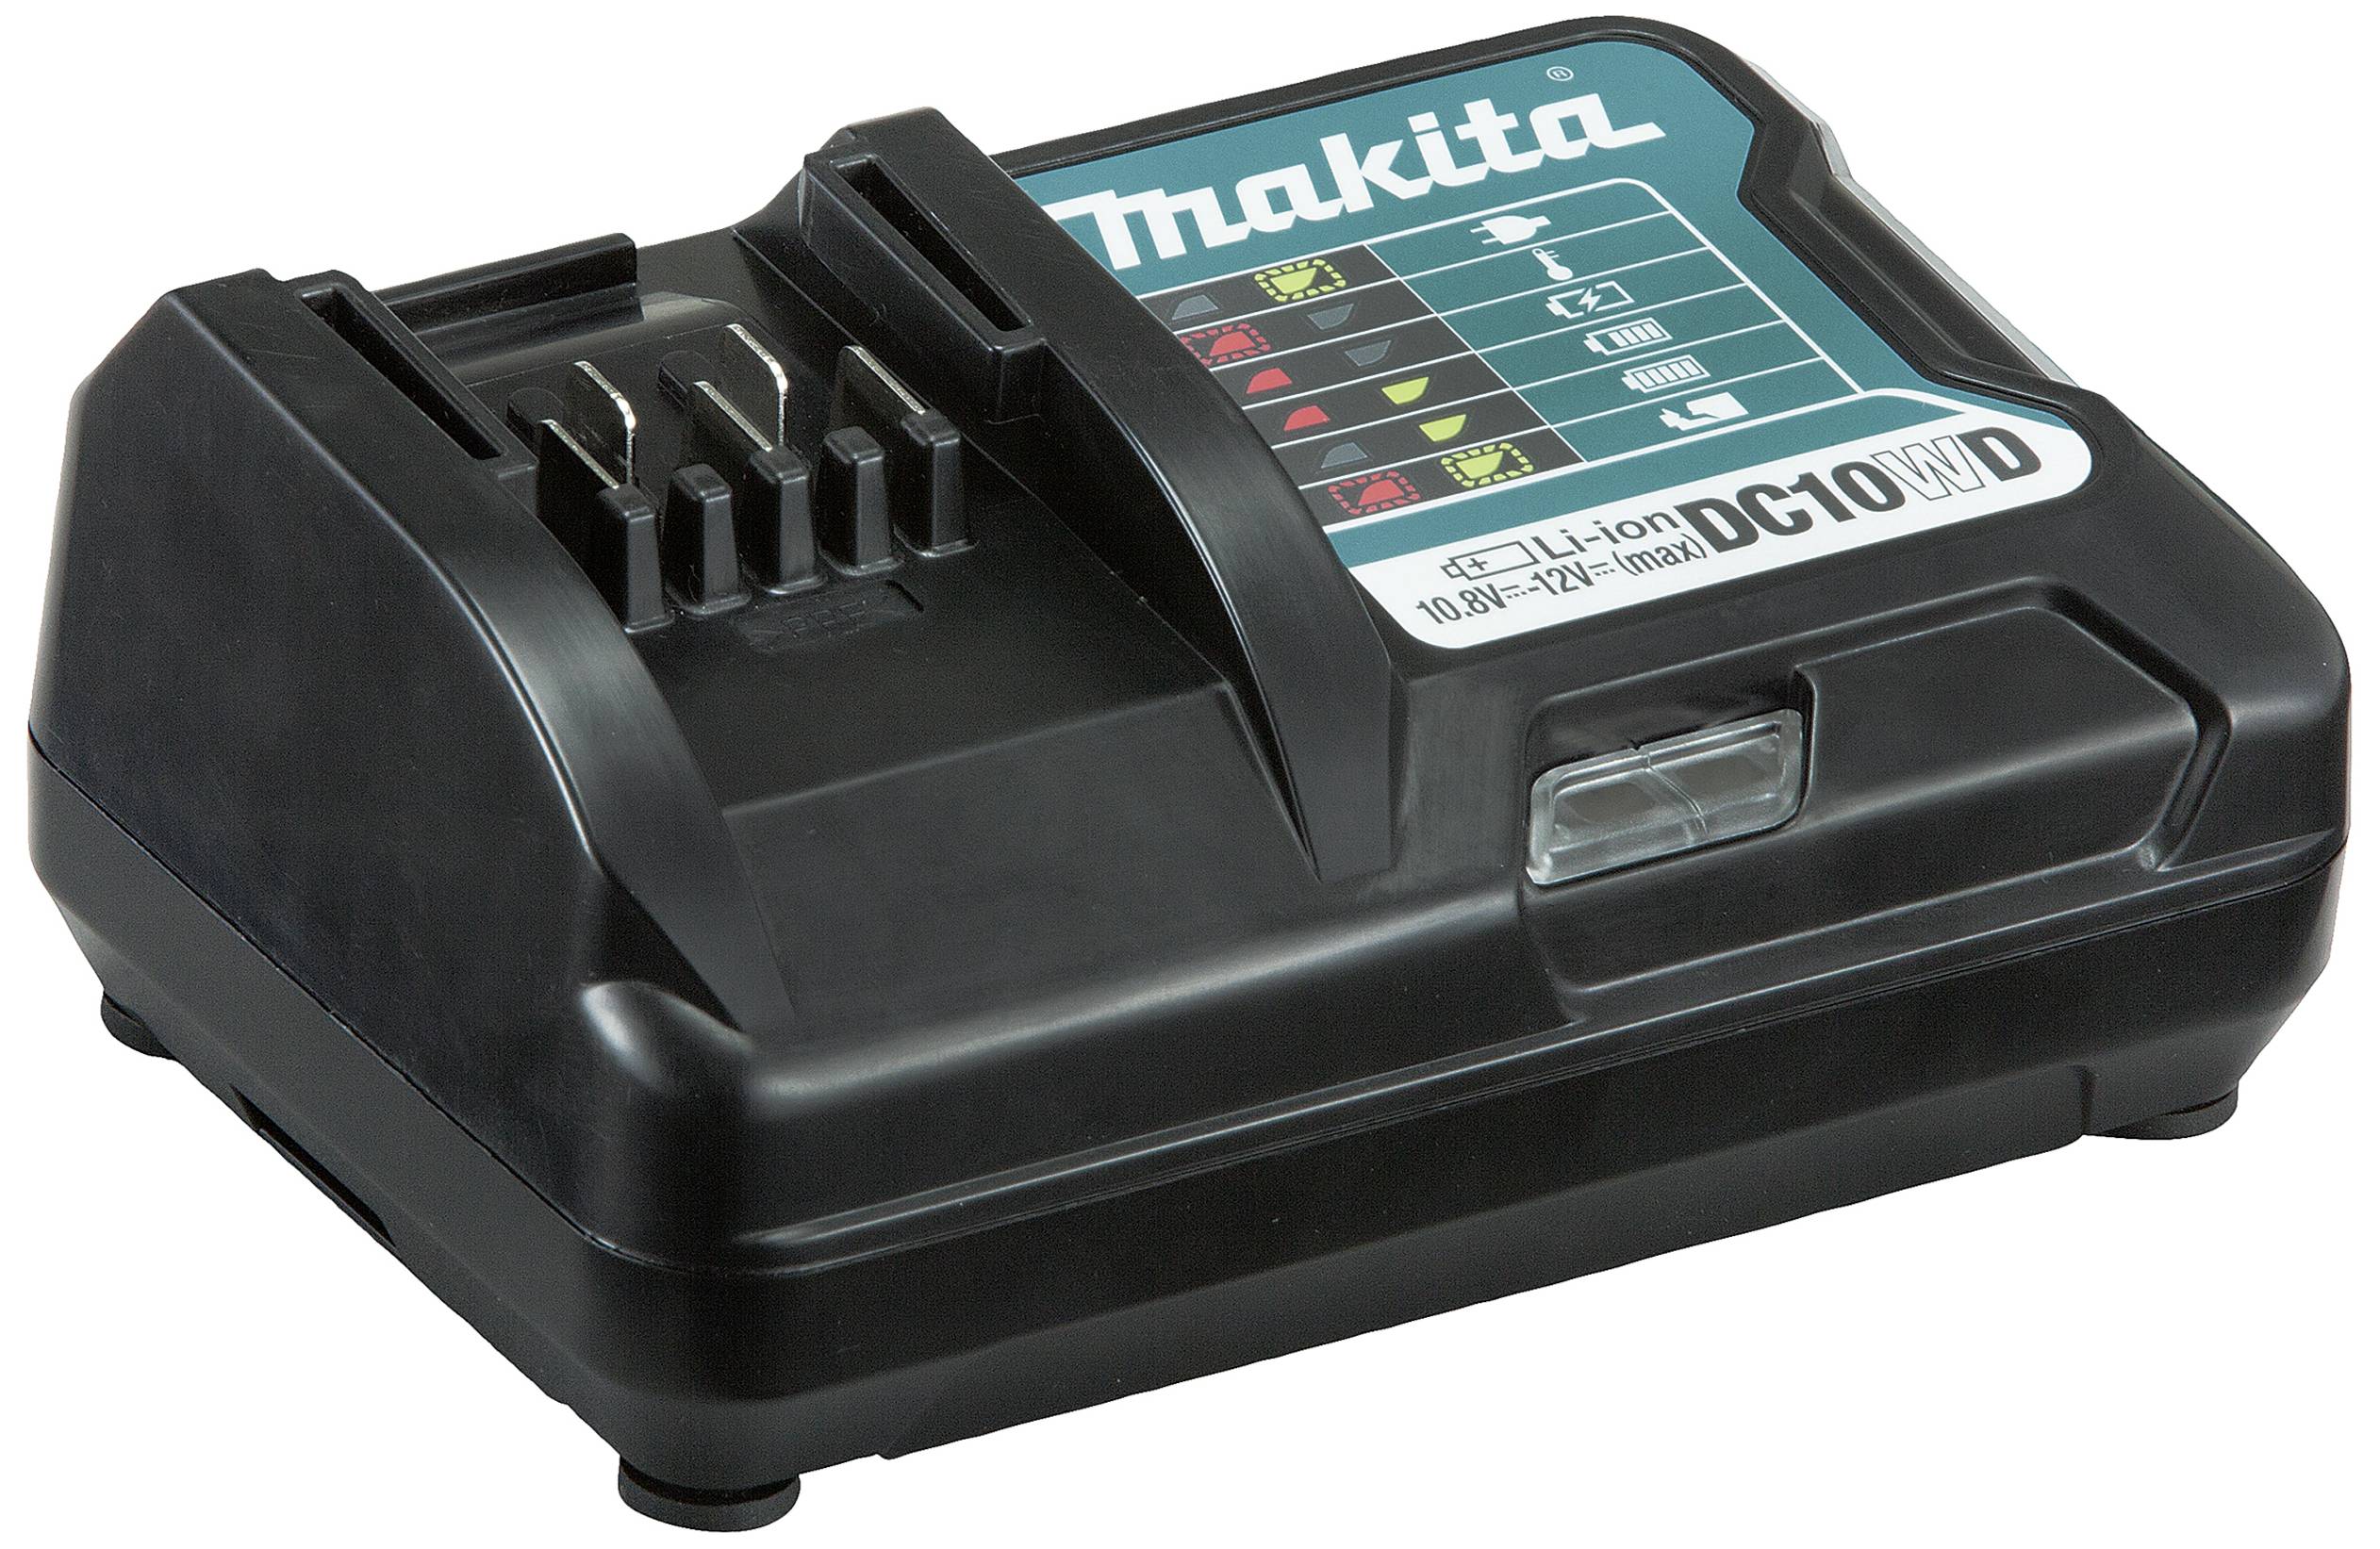 Specificiteit Gangster verdund Makita DC10WD 12V Battery pack charger 197343-0 | Conrad.com